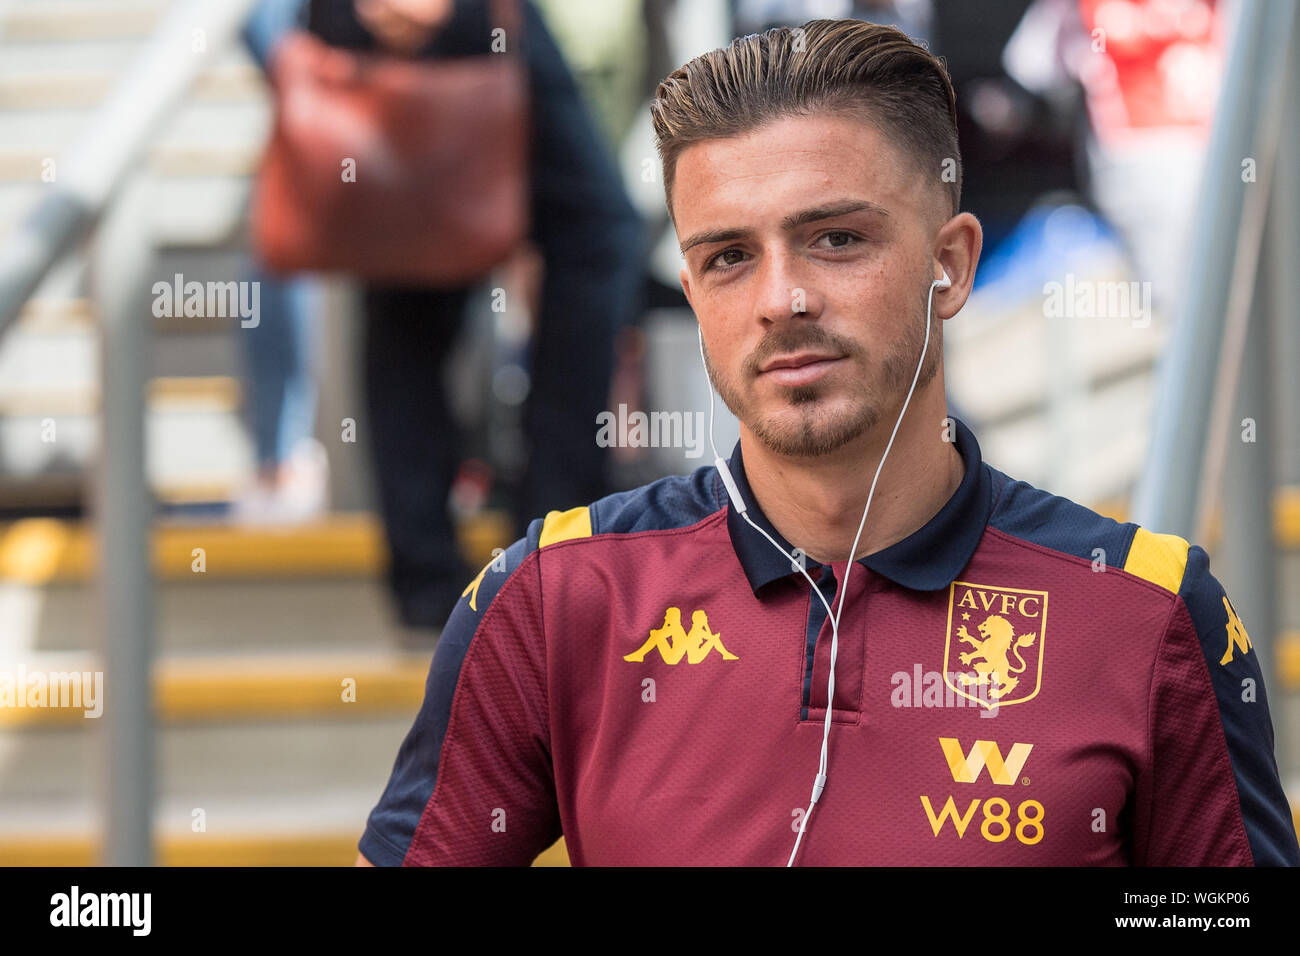 LONDON, ENGLAND - AUGUST 31: Jack Grealish of Aston Villa arrived for the Premier League match between Crystal Palace and Aston Villa at Selhurst Park on August 31, 2019 in London, United Kingdom. (Photo by Sebastian Frej/MB Media) Stock Photo